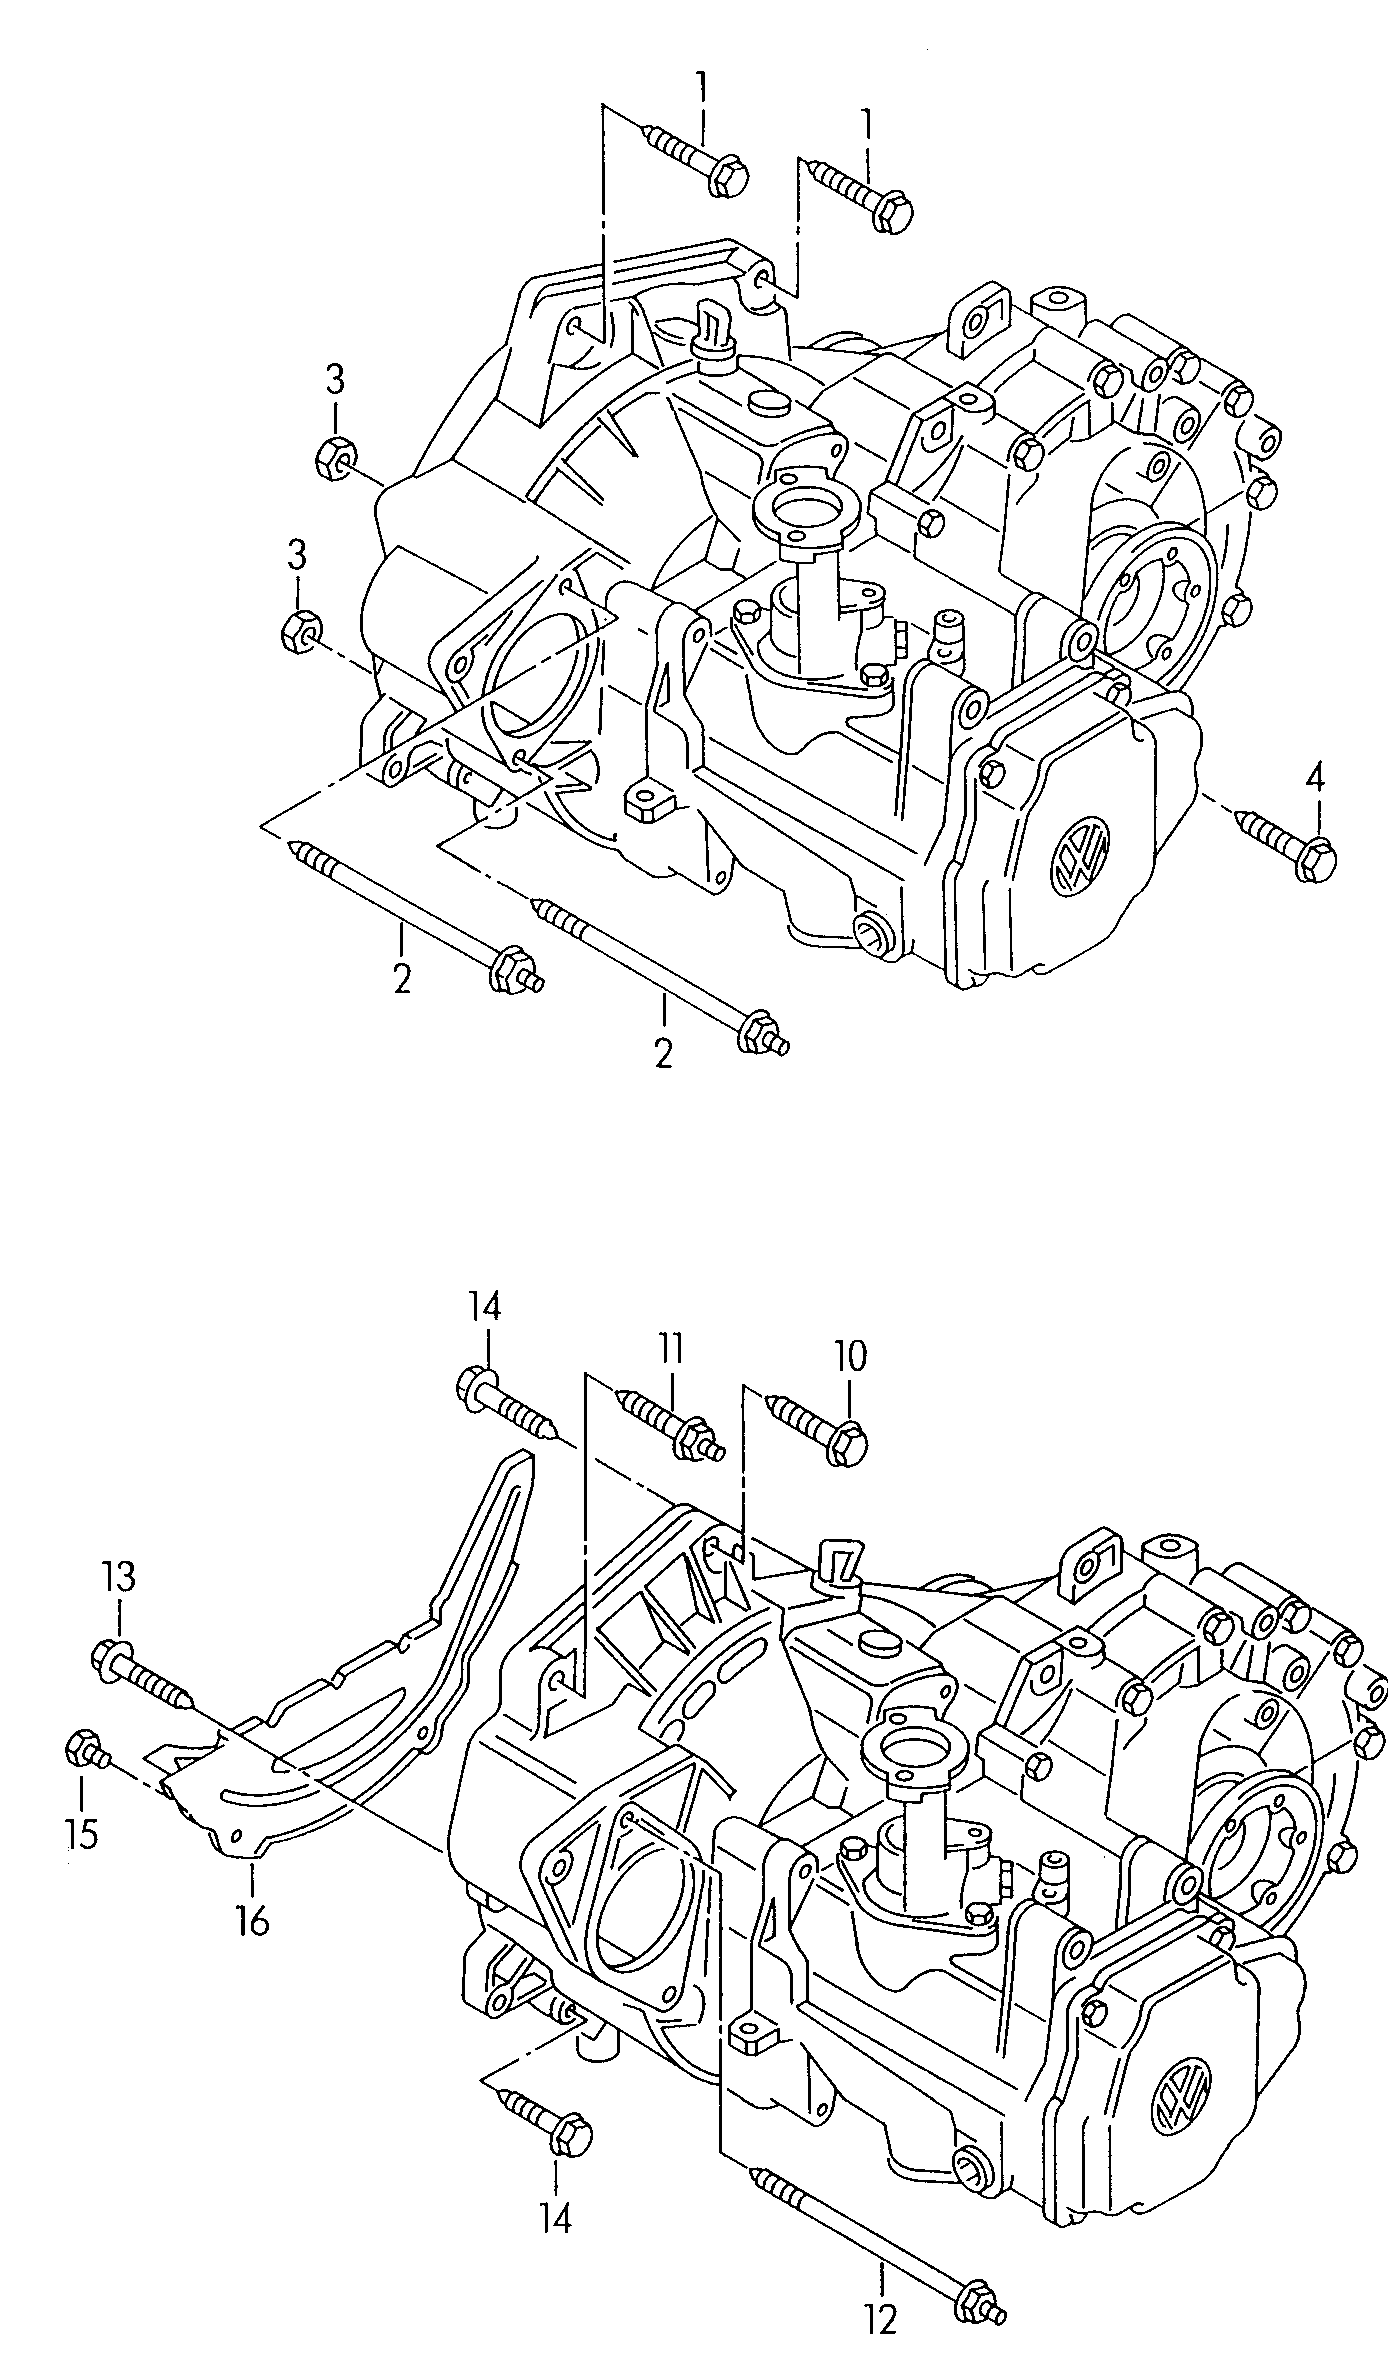 mounting parts for engine and<br>transmission 6-cylinder - Corrado - cor